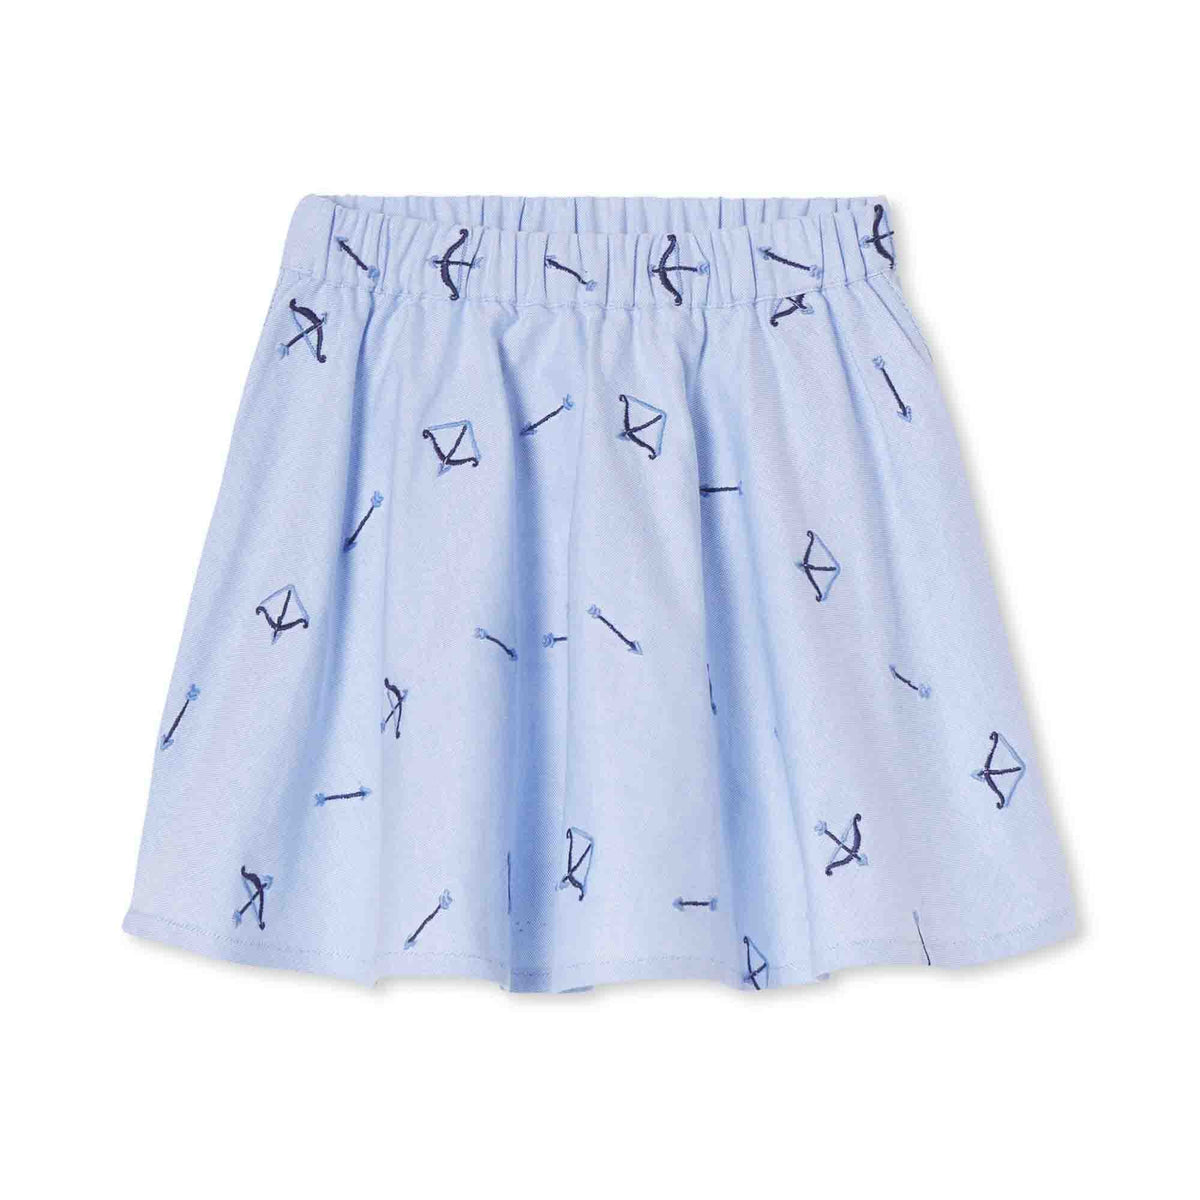 Classic and Preppy Sabrina Skirt, Bow &amp; Arrow Embroidery-Bottoms-Bow and Arrow Embroidery-XS (2-3T)-CPC - Classic Prep Childrenswear